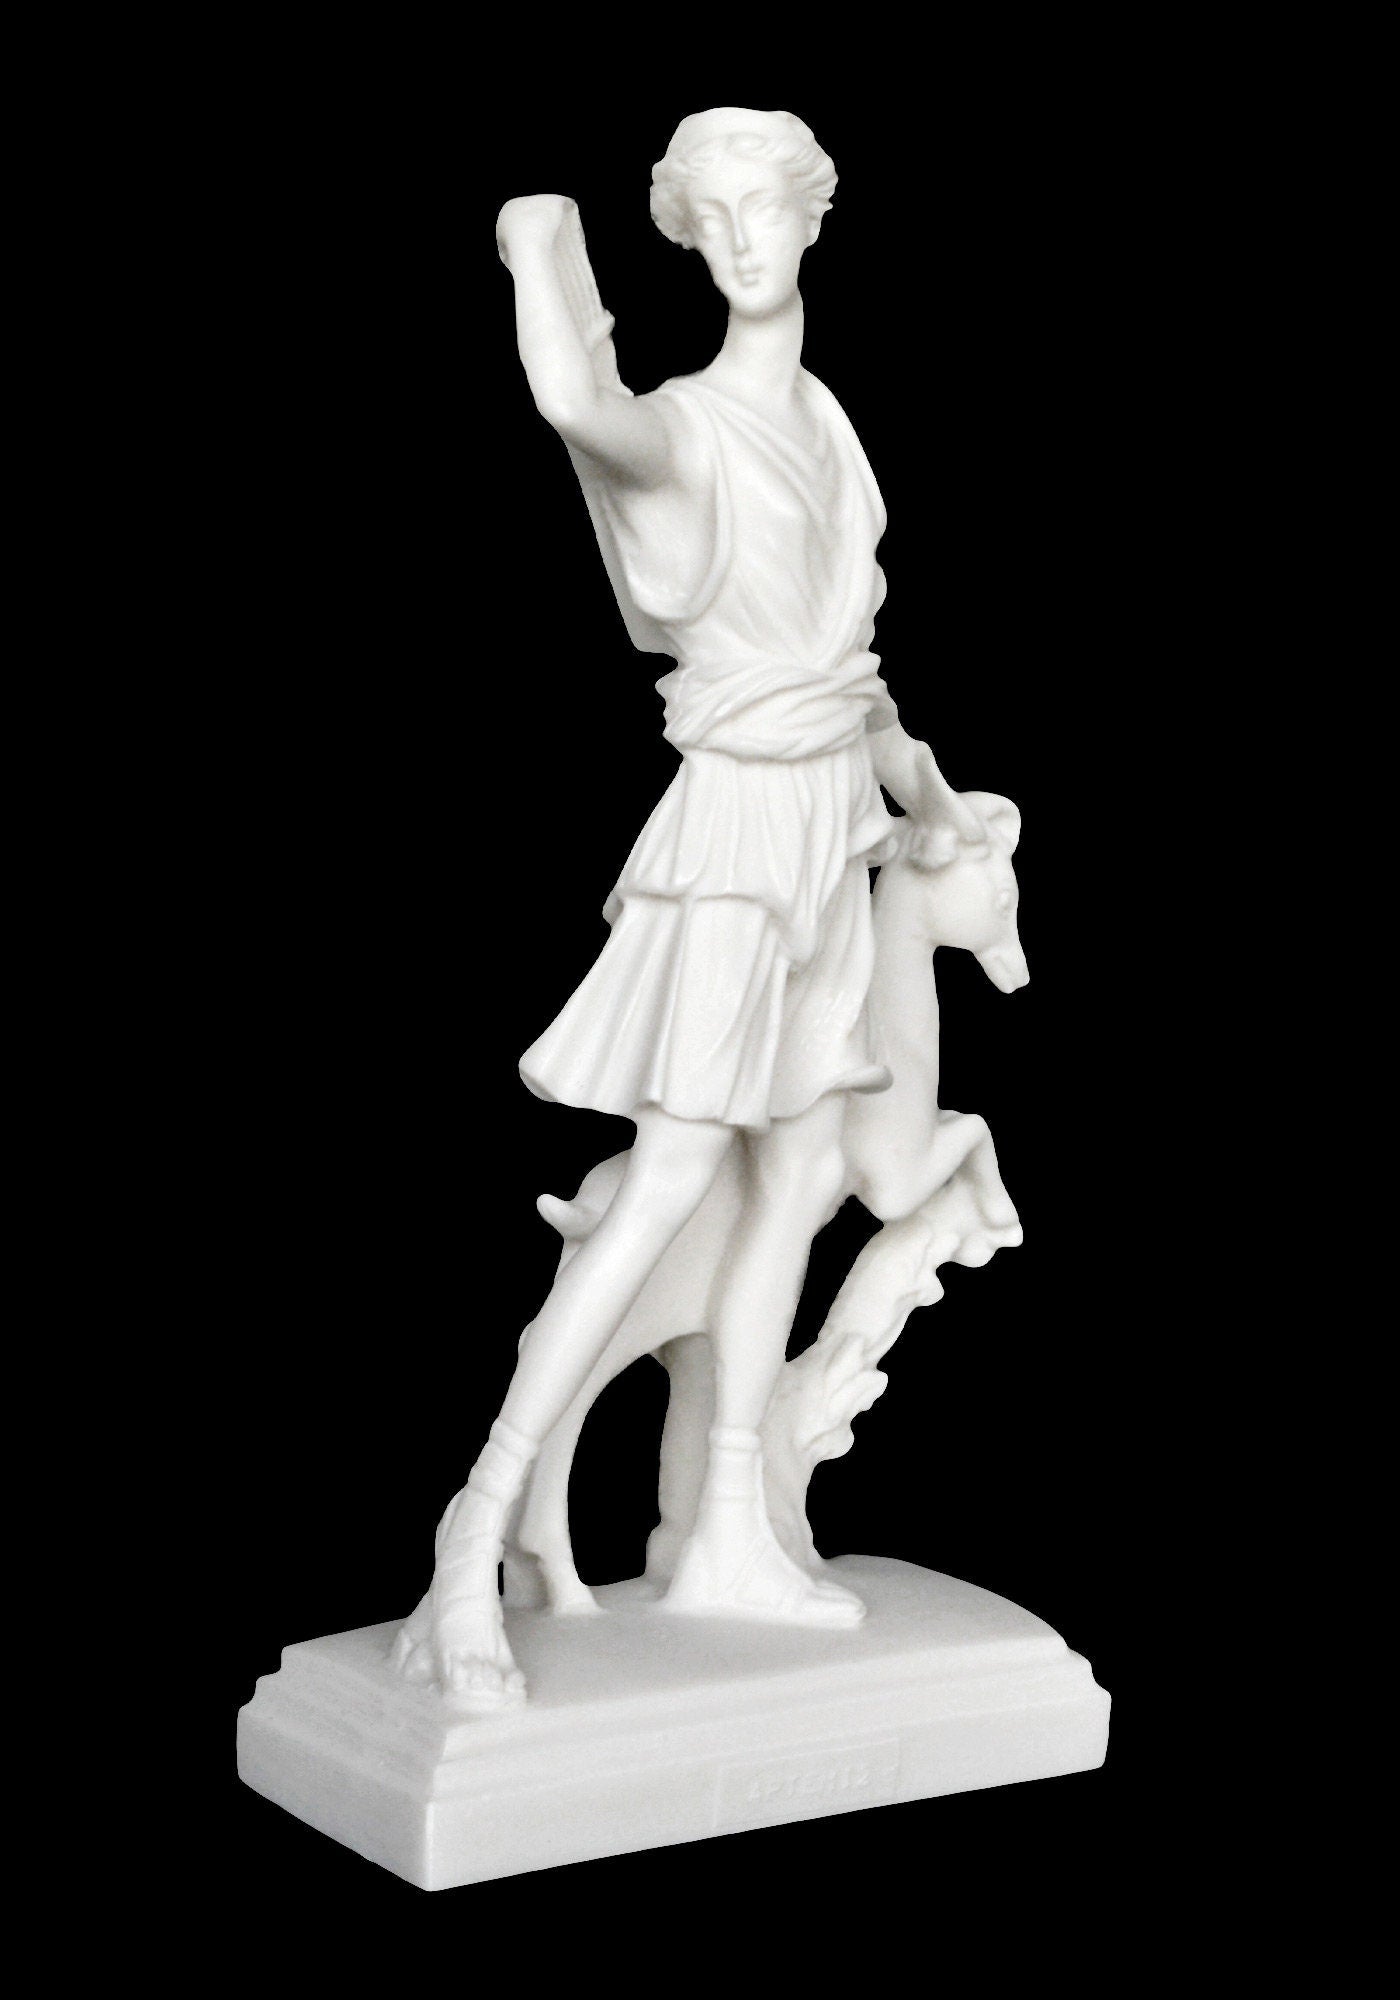 Artemis Diana – Greek Roman Goddess of Hunt, the Wilderness, Wild Animals, the Moon, and Chastity - Sister of Apollo - Αlabaster Statue